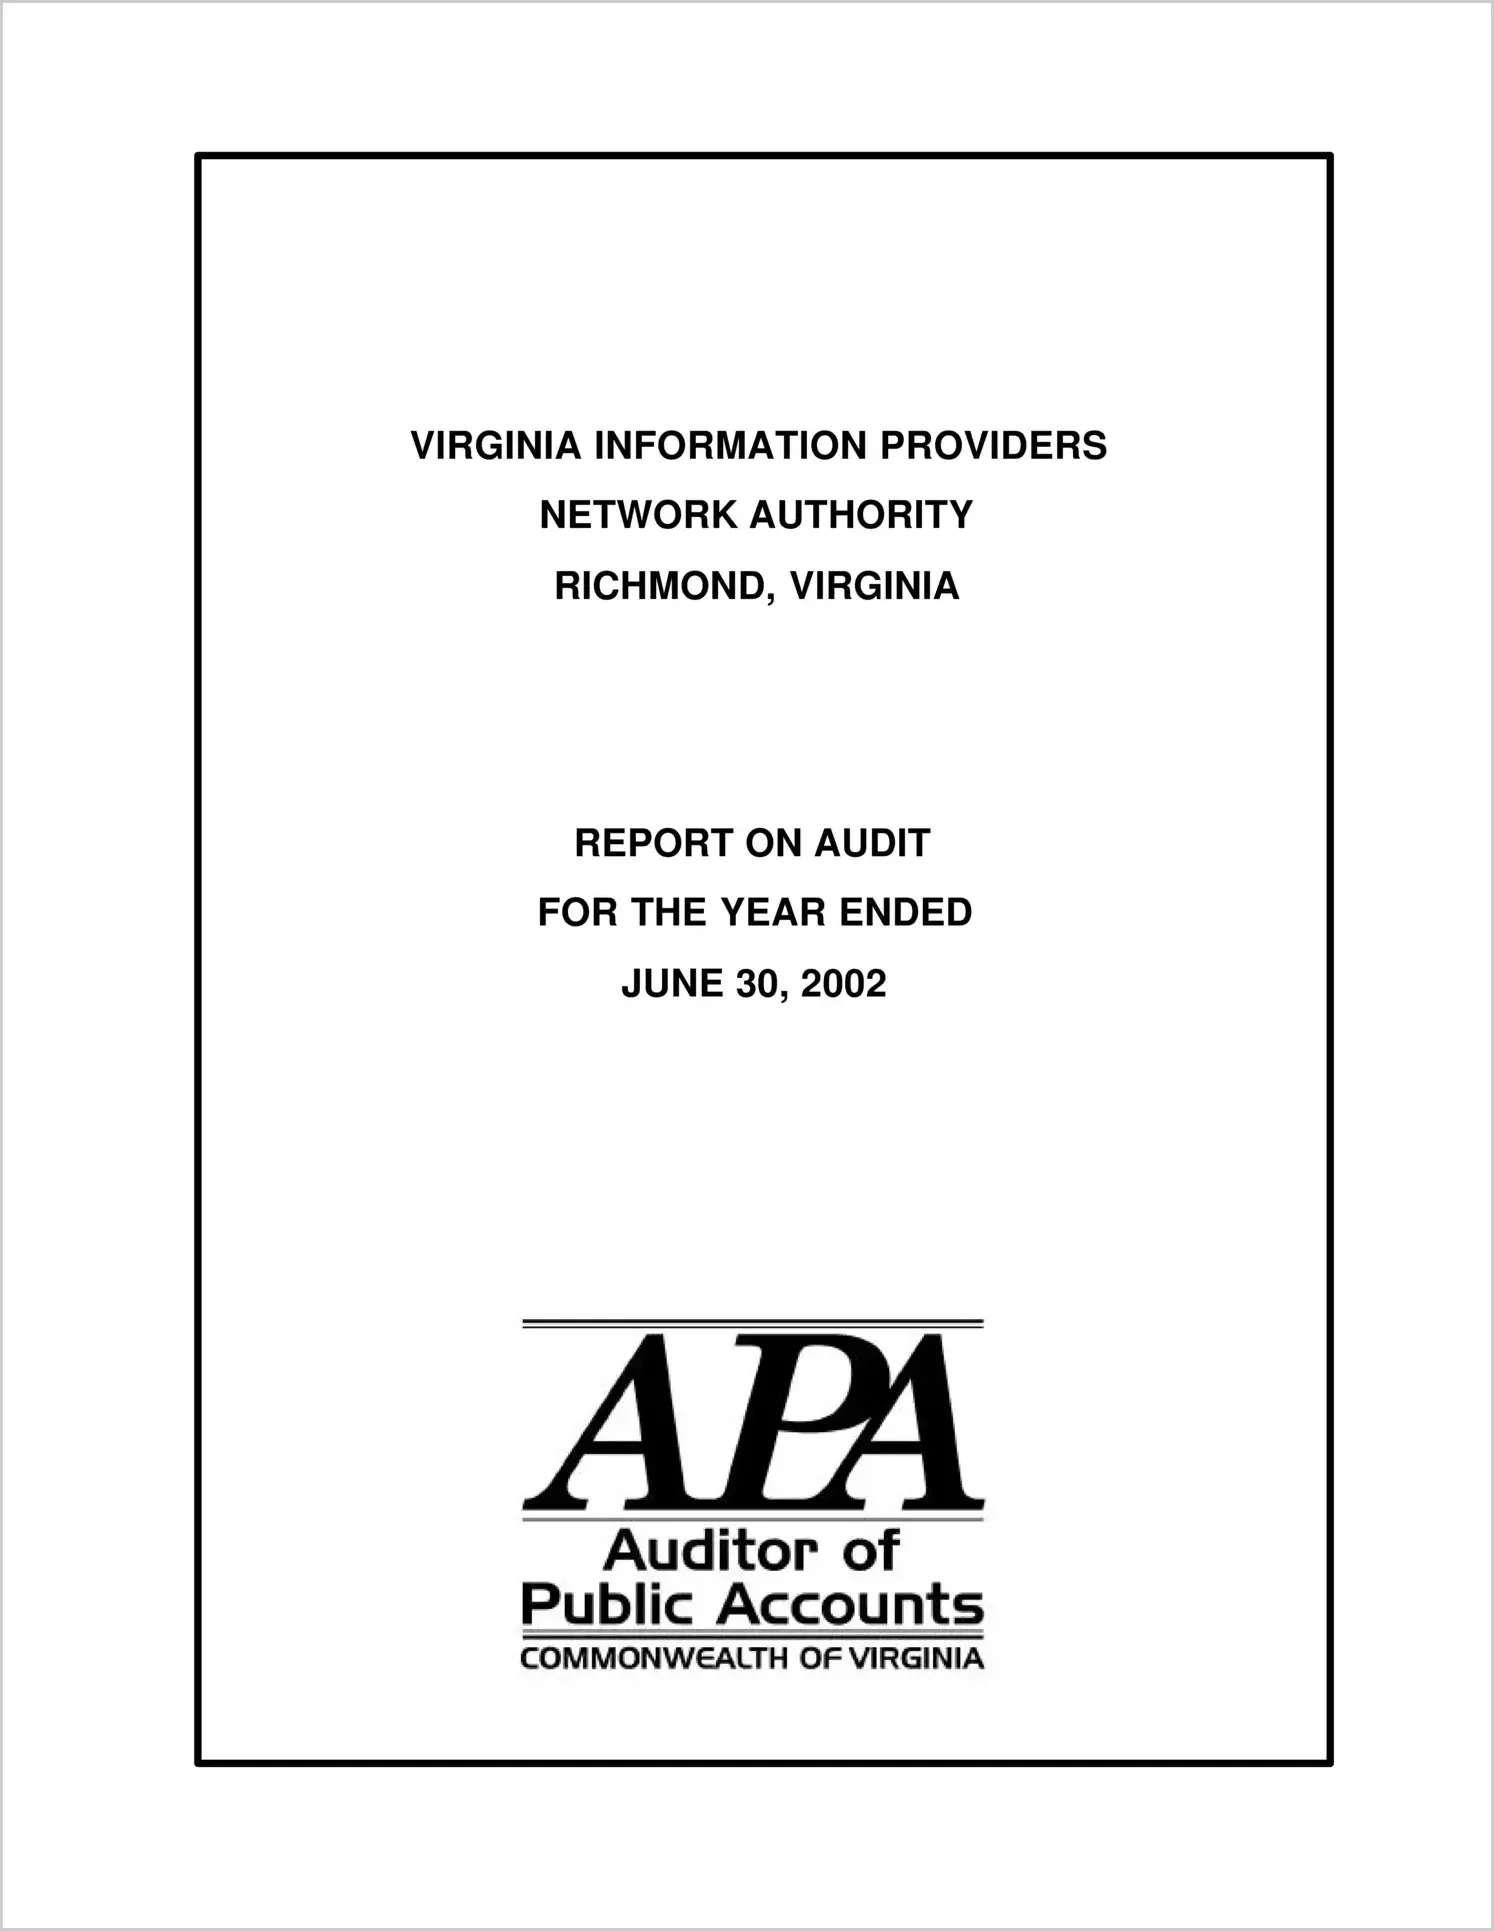 Virginia Information Providers Network Authority for the year ended June 30, 2002